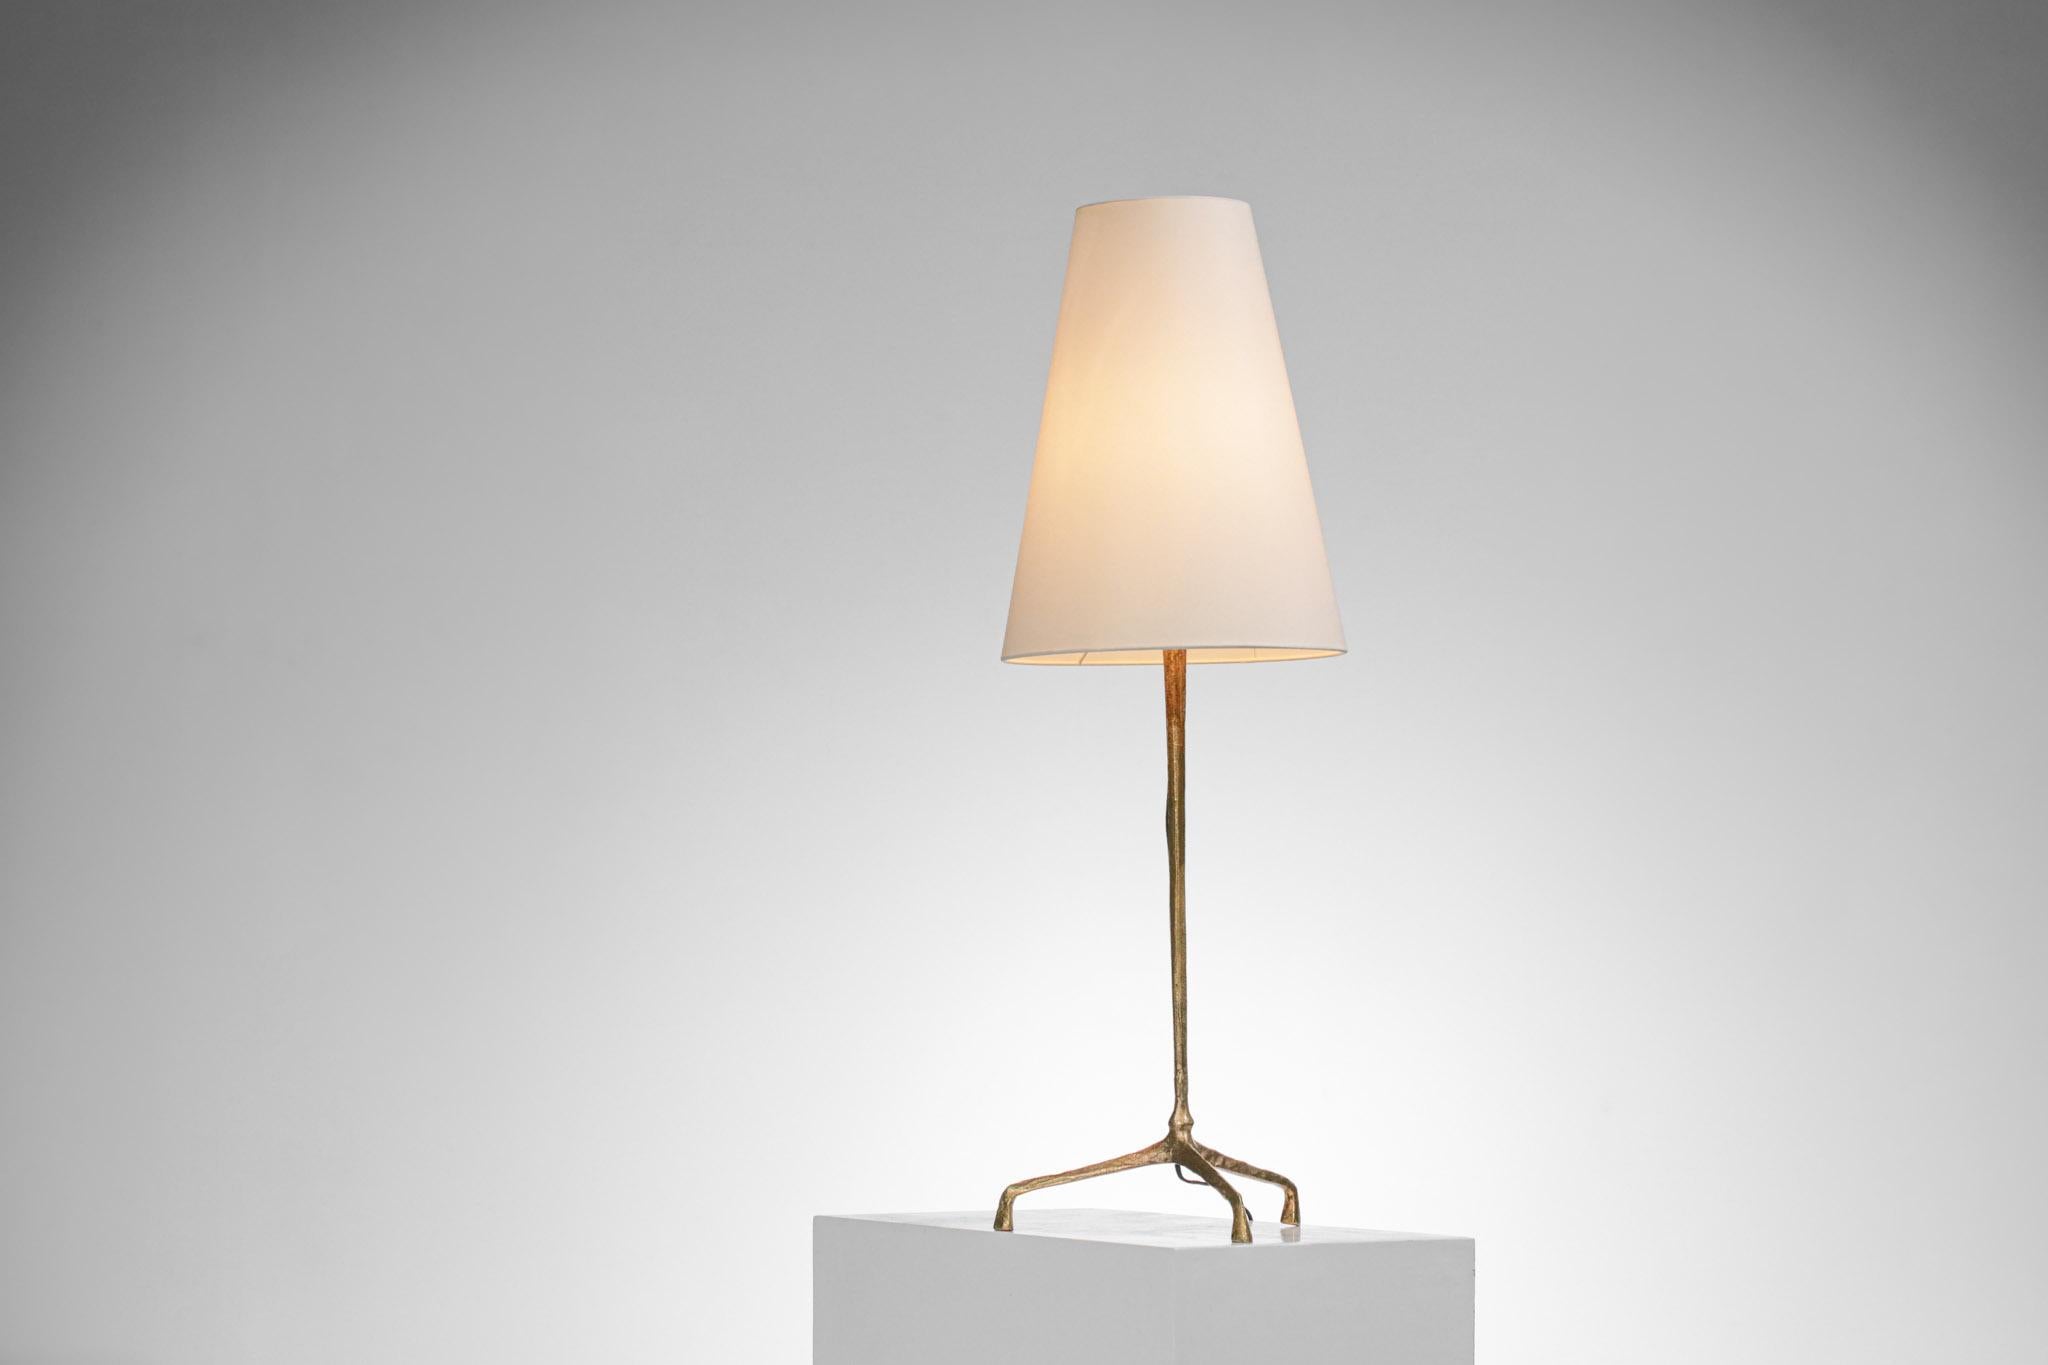 French Large Table Lamp by Felix Agostini in Gilded Bronze 50's - F423 2